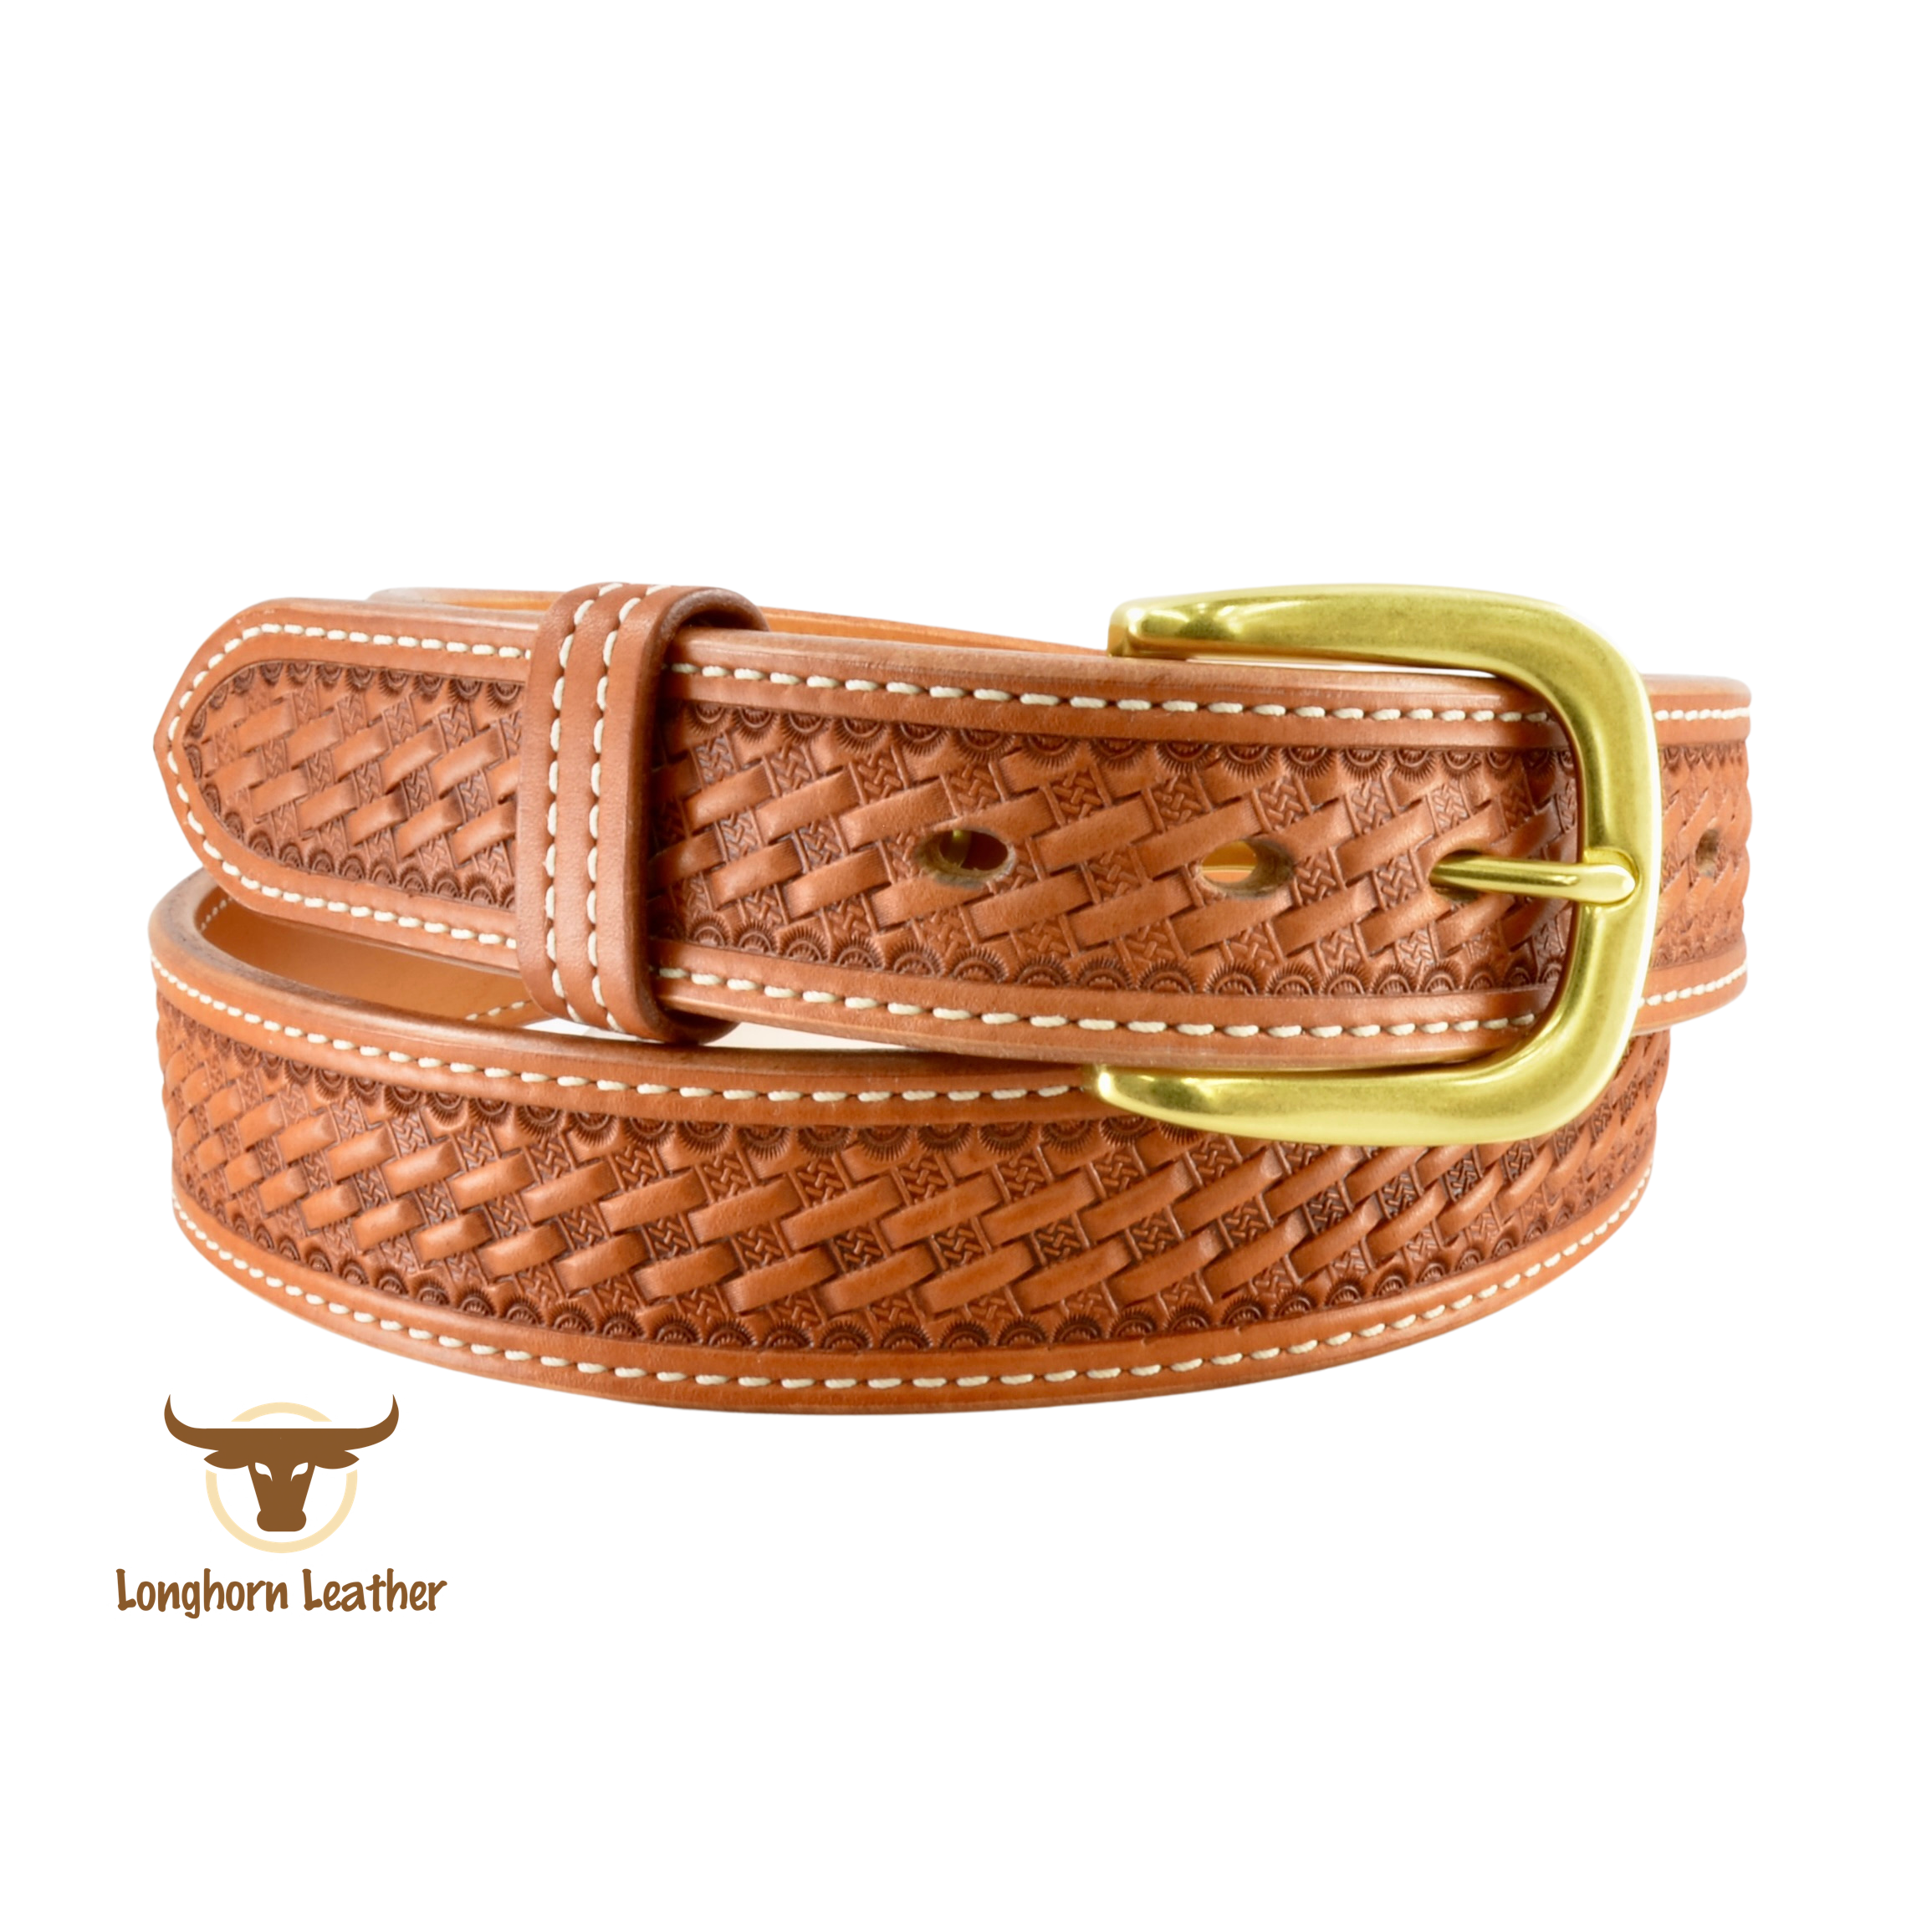 Custom leather belt featuring the "Chandler" design.  Individually handcrafted at Longhorn Leather AZ